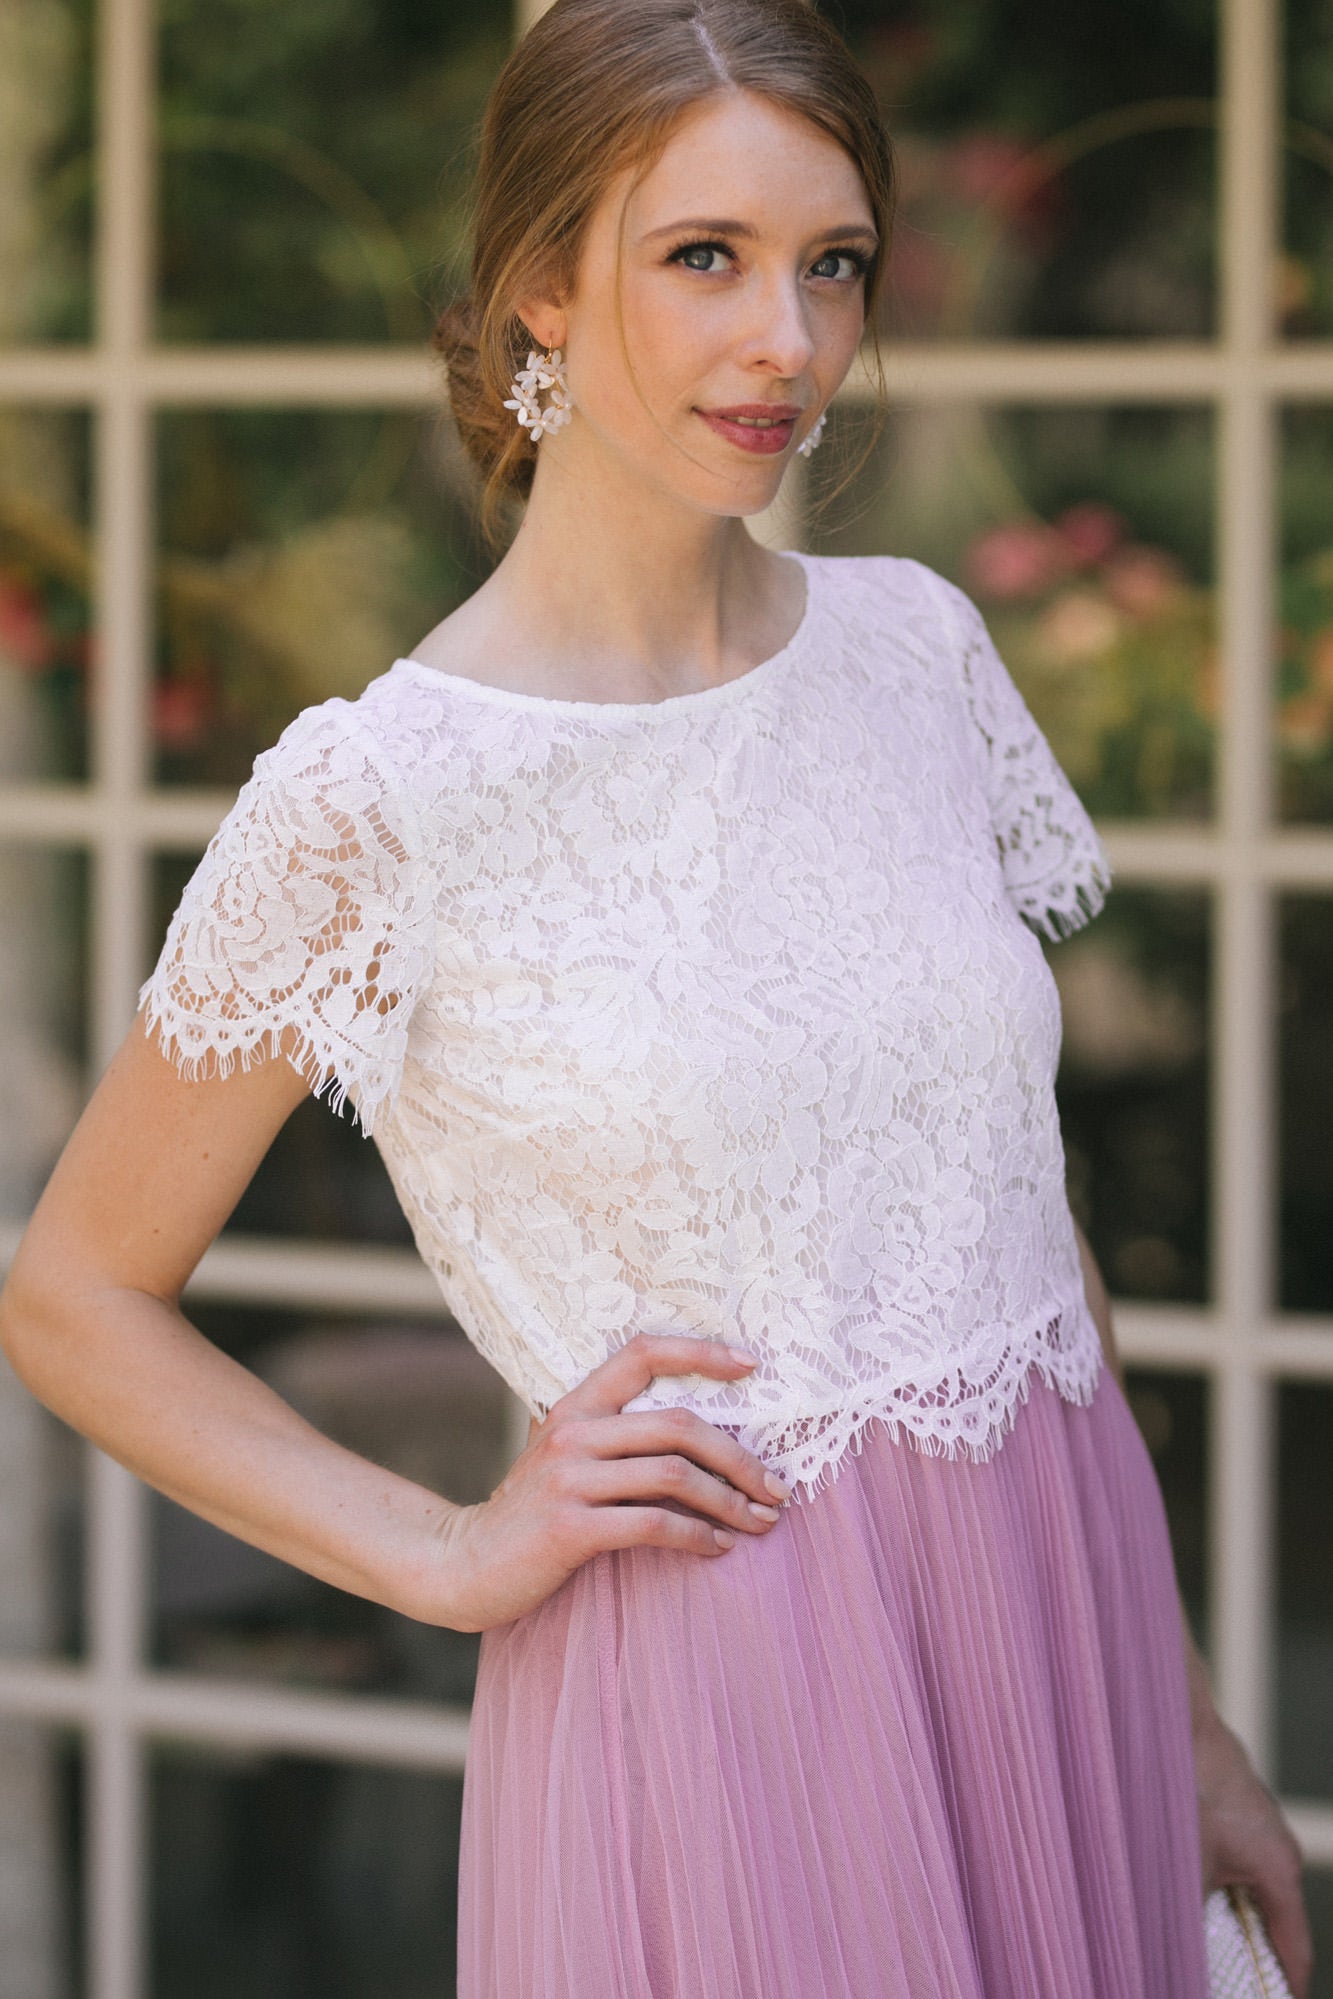 Lace Top with Short Sleeves - Ellie - Morning Lavender Online Boutique